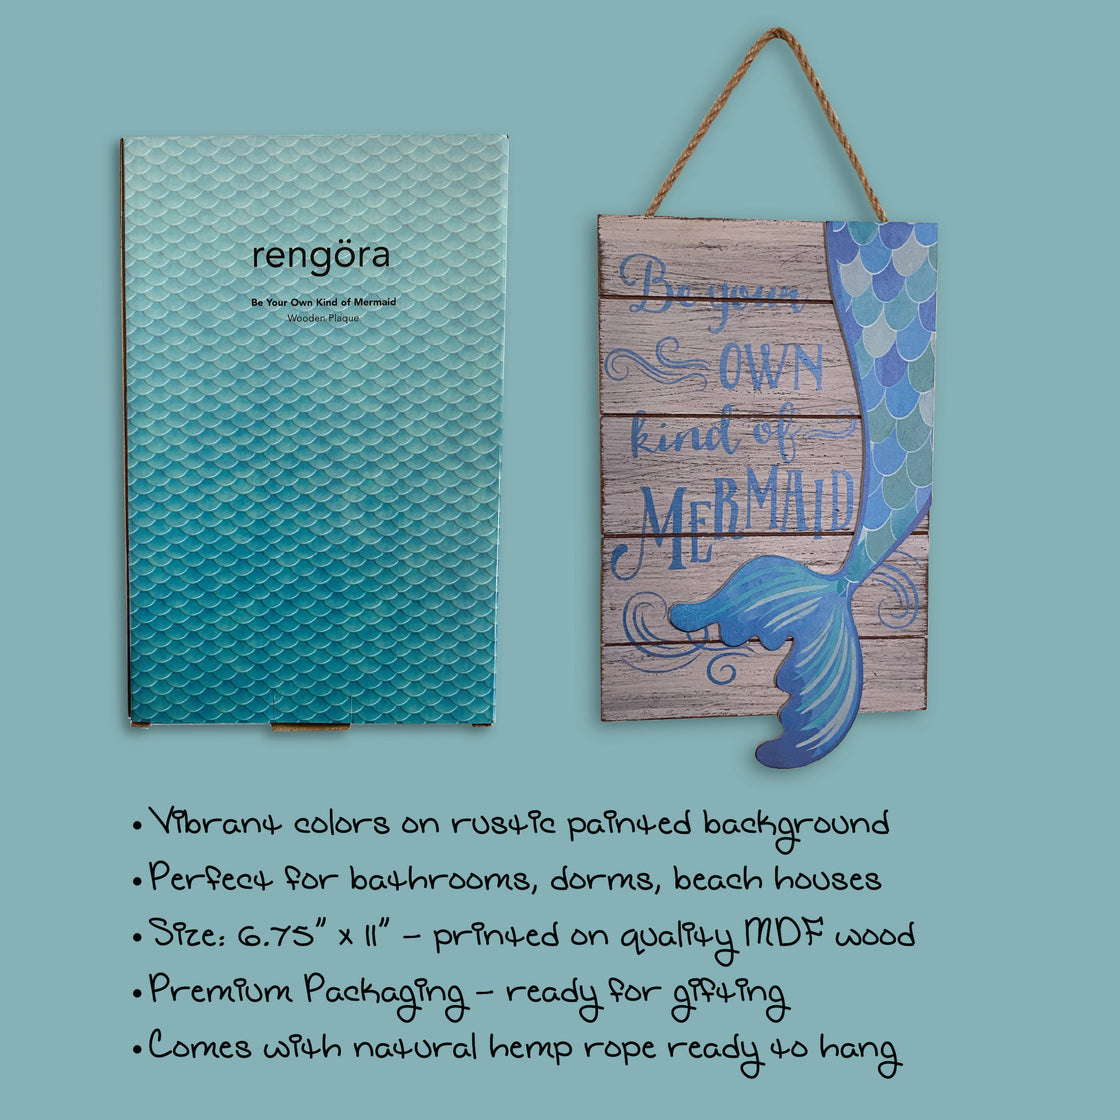  The rengora Mermaid Beach Art featuring its distinctive packaging with a mermaid scale-like design